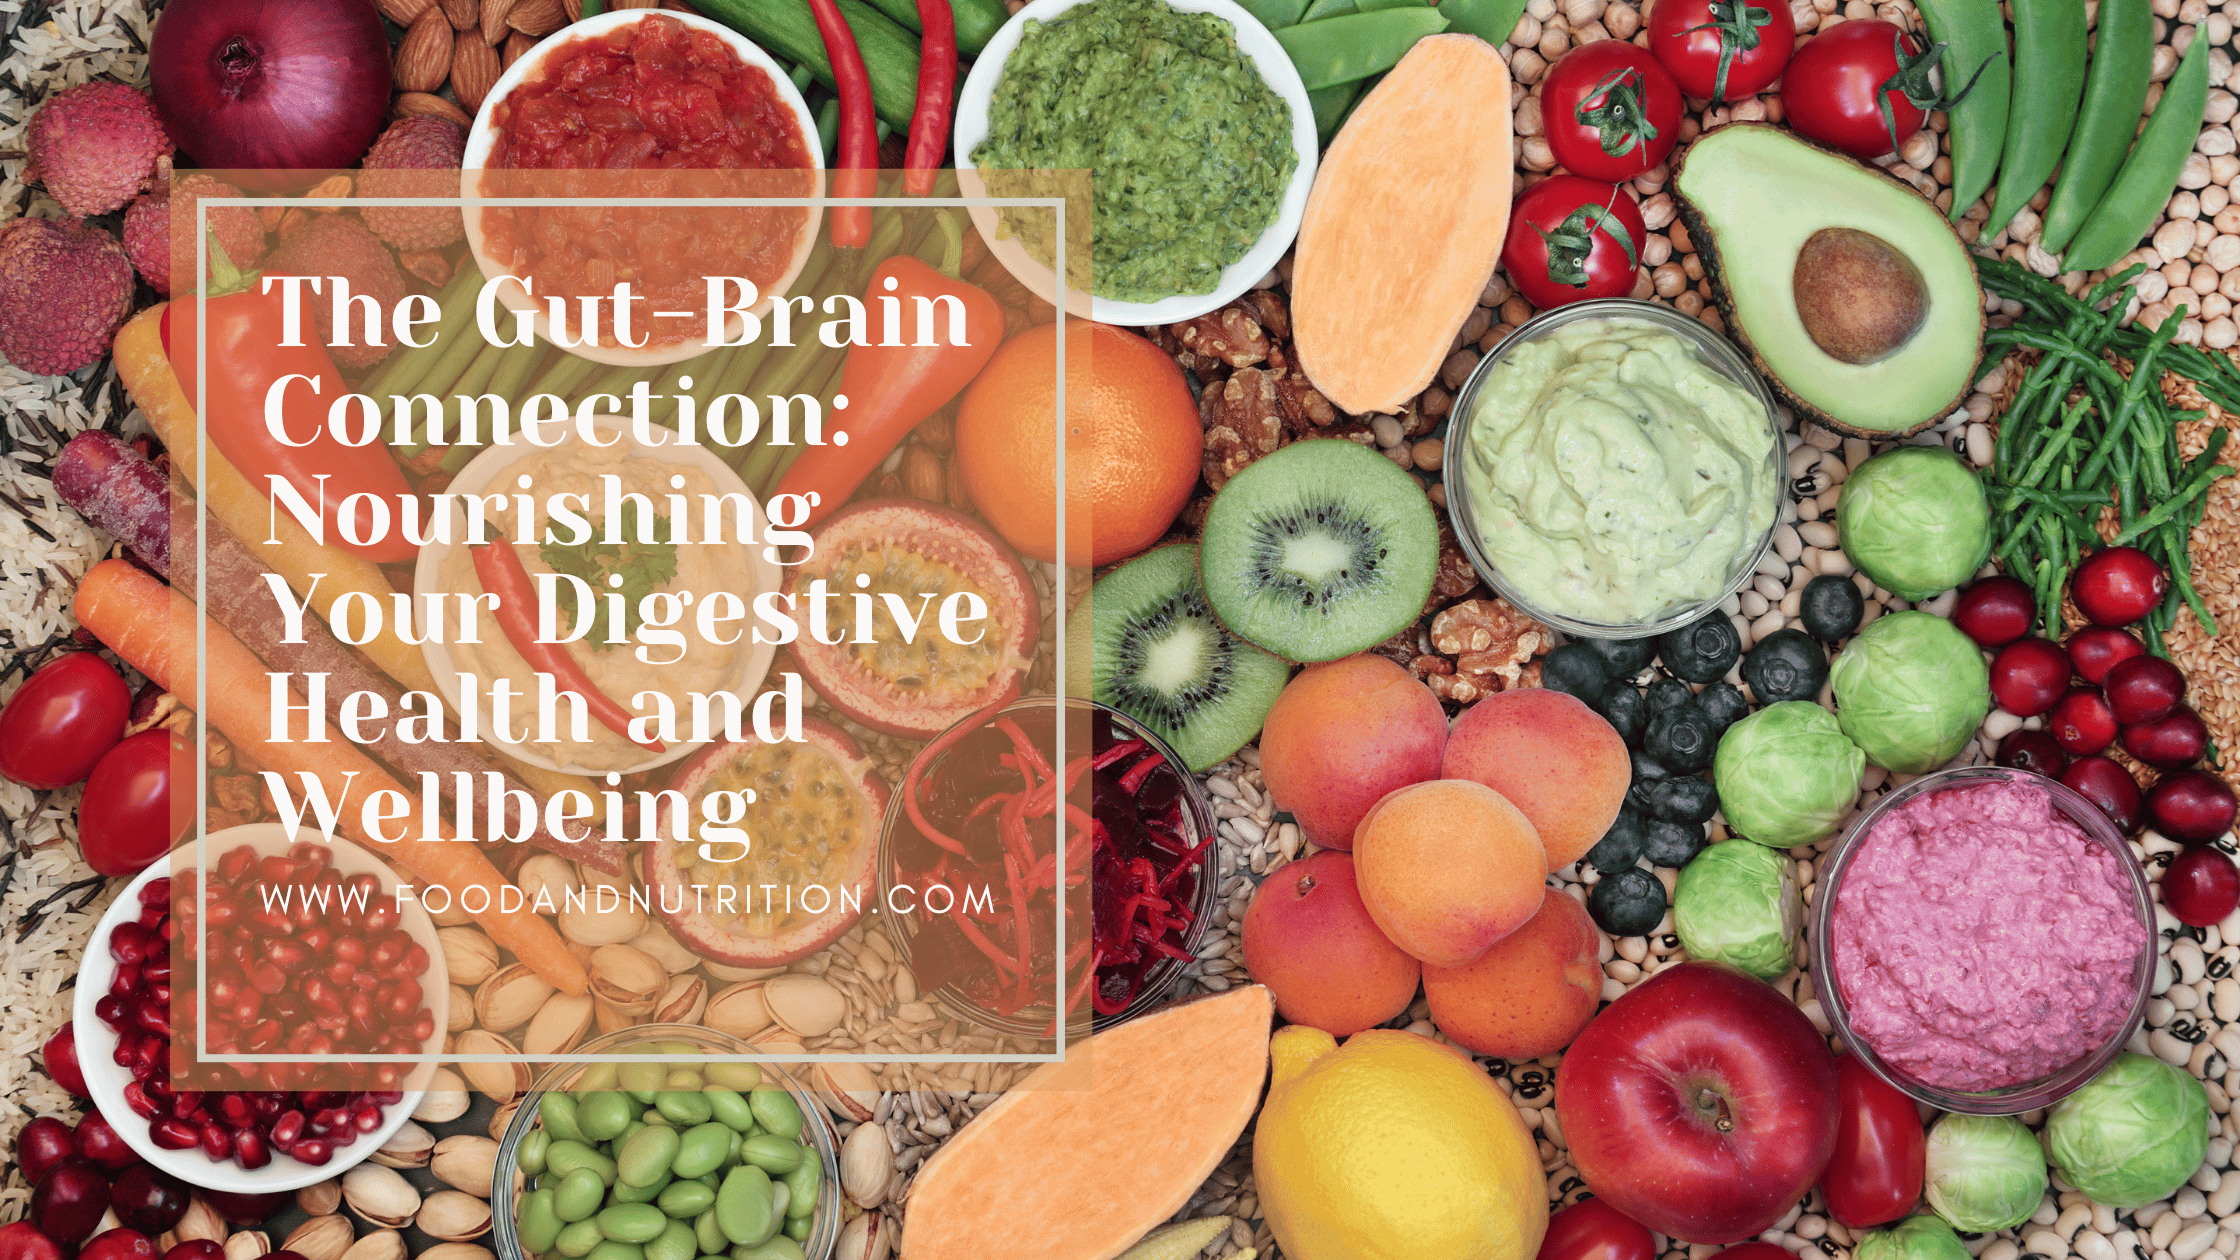 Elevate Wellbeing: The Gut-Brain Connection & Nourishing Meals